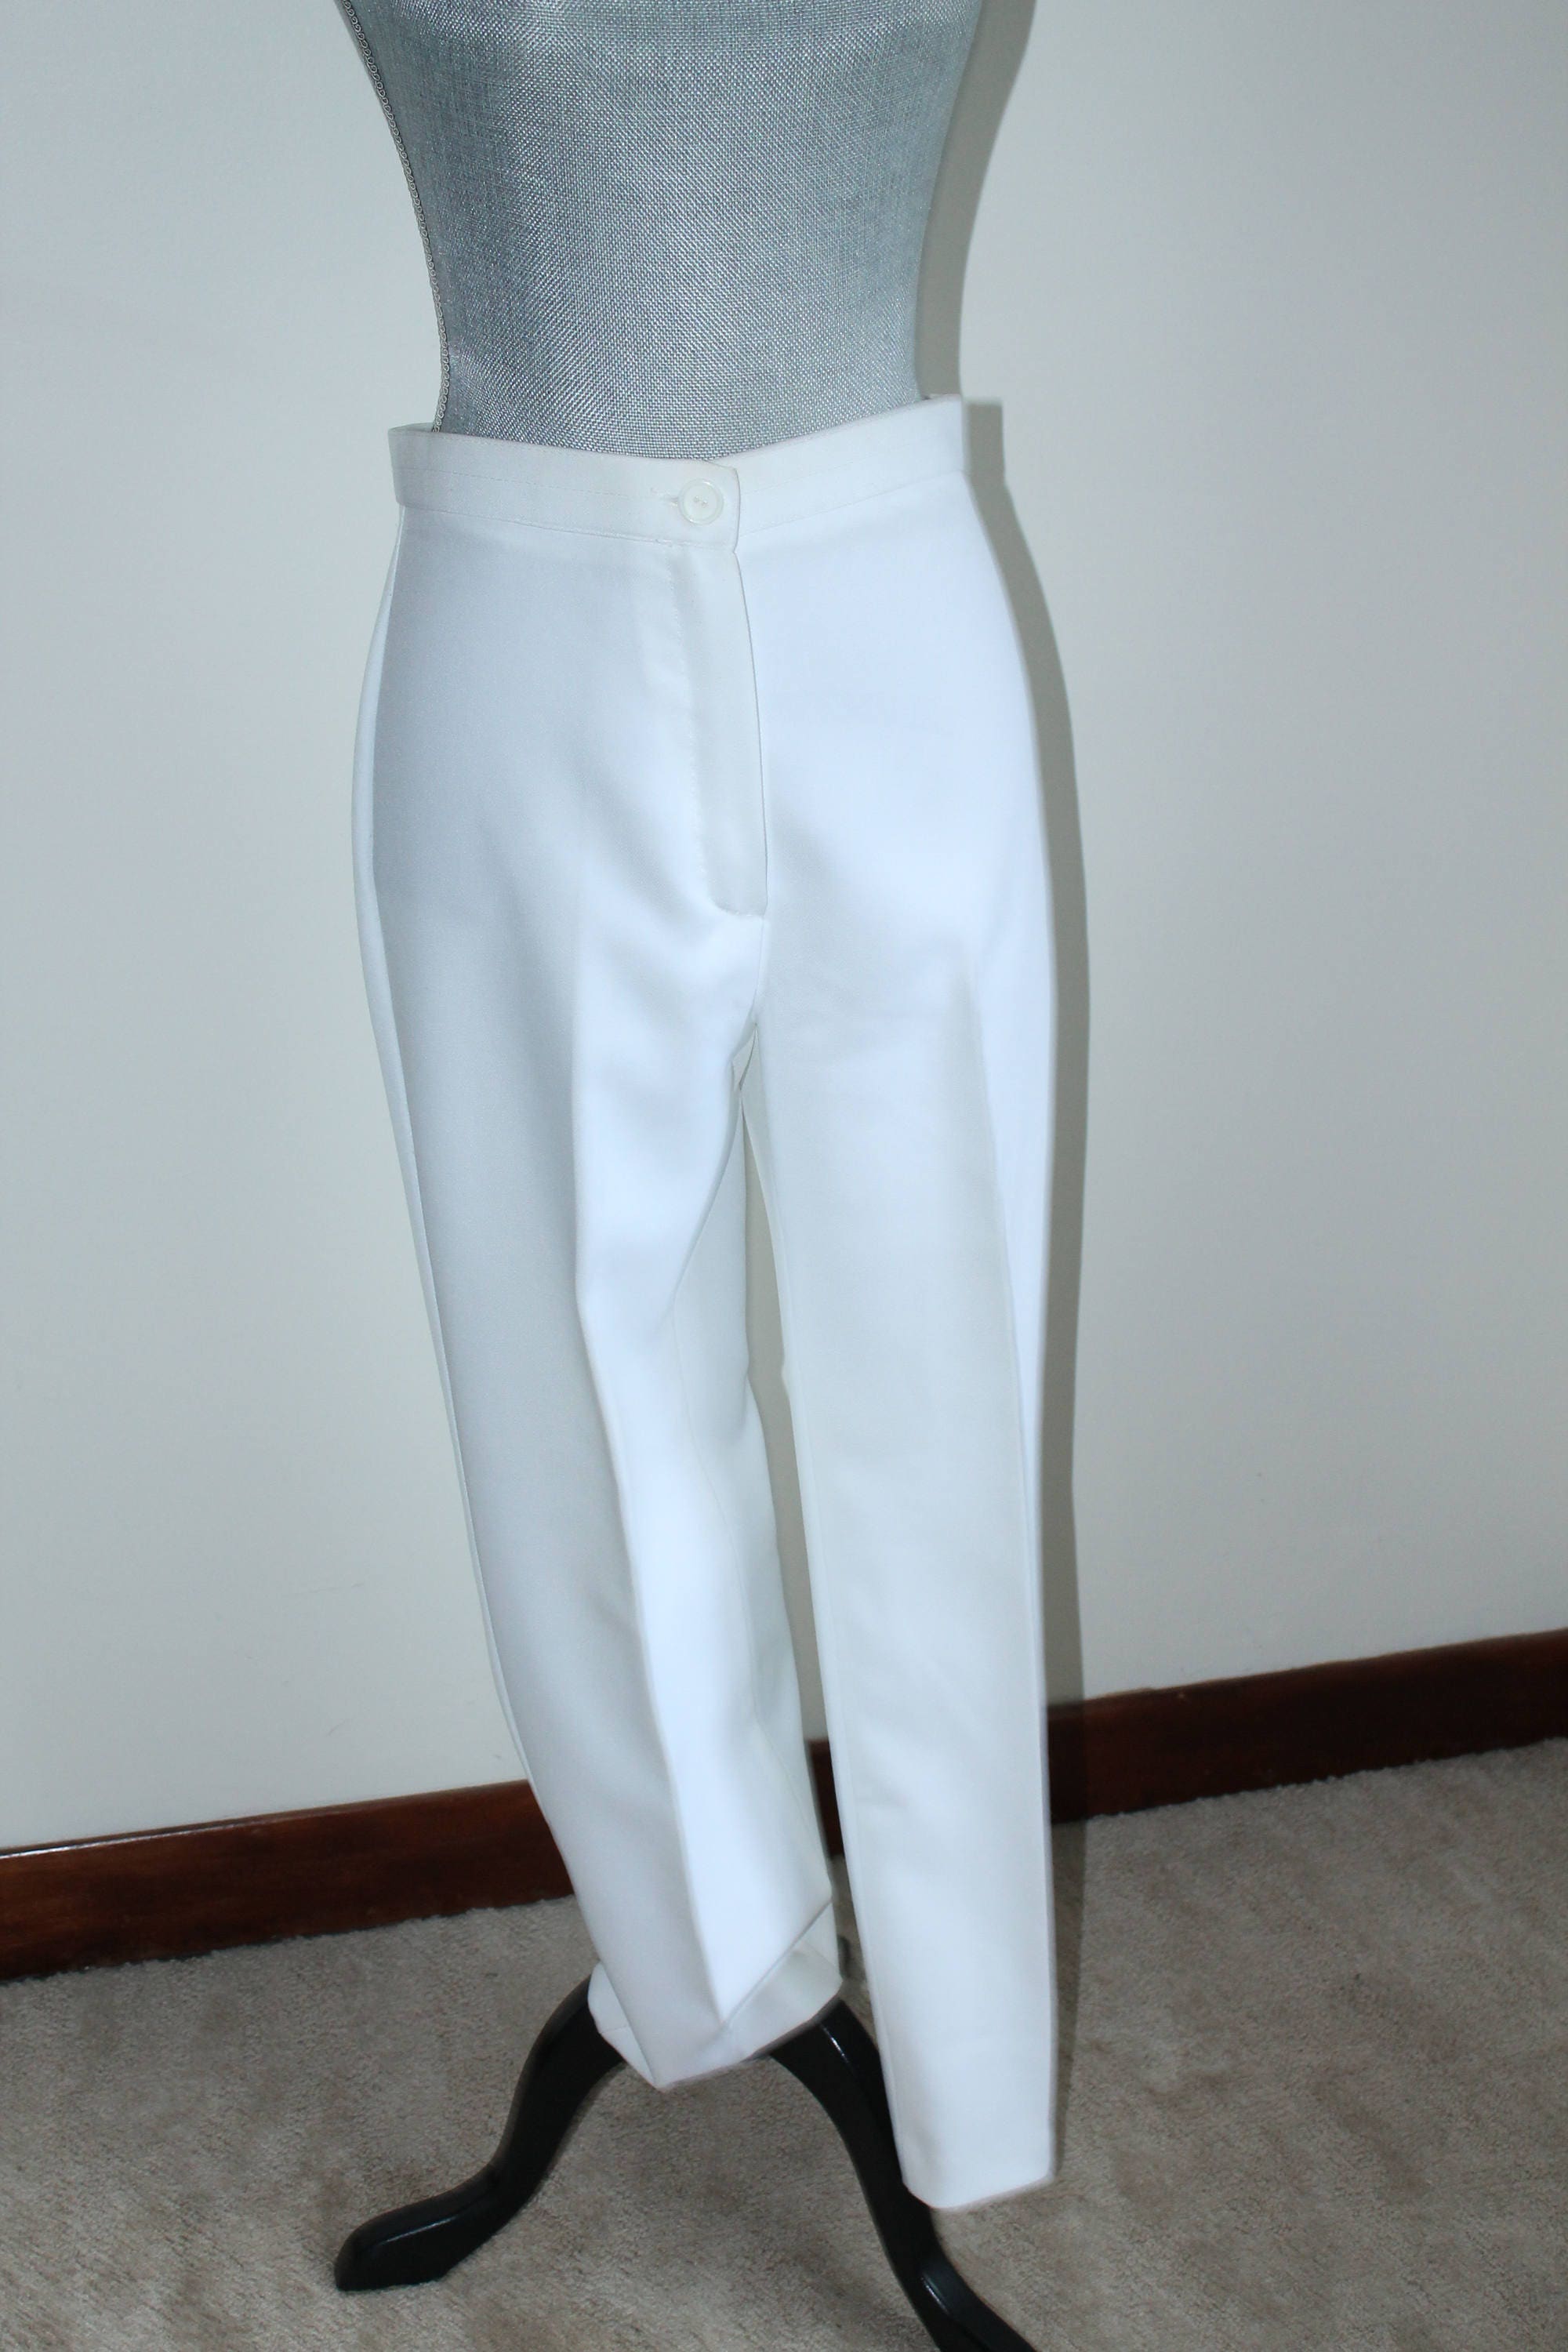 White Summer Pants by Barat Vintage 1970s Trousers Size 13 14 | Etsy